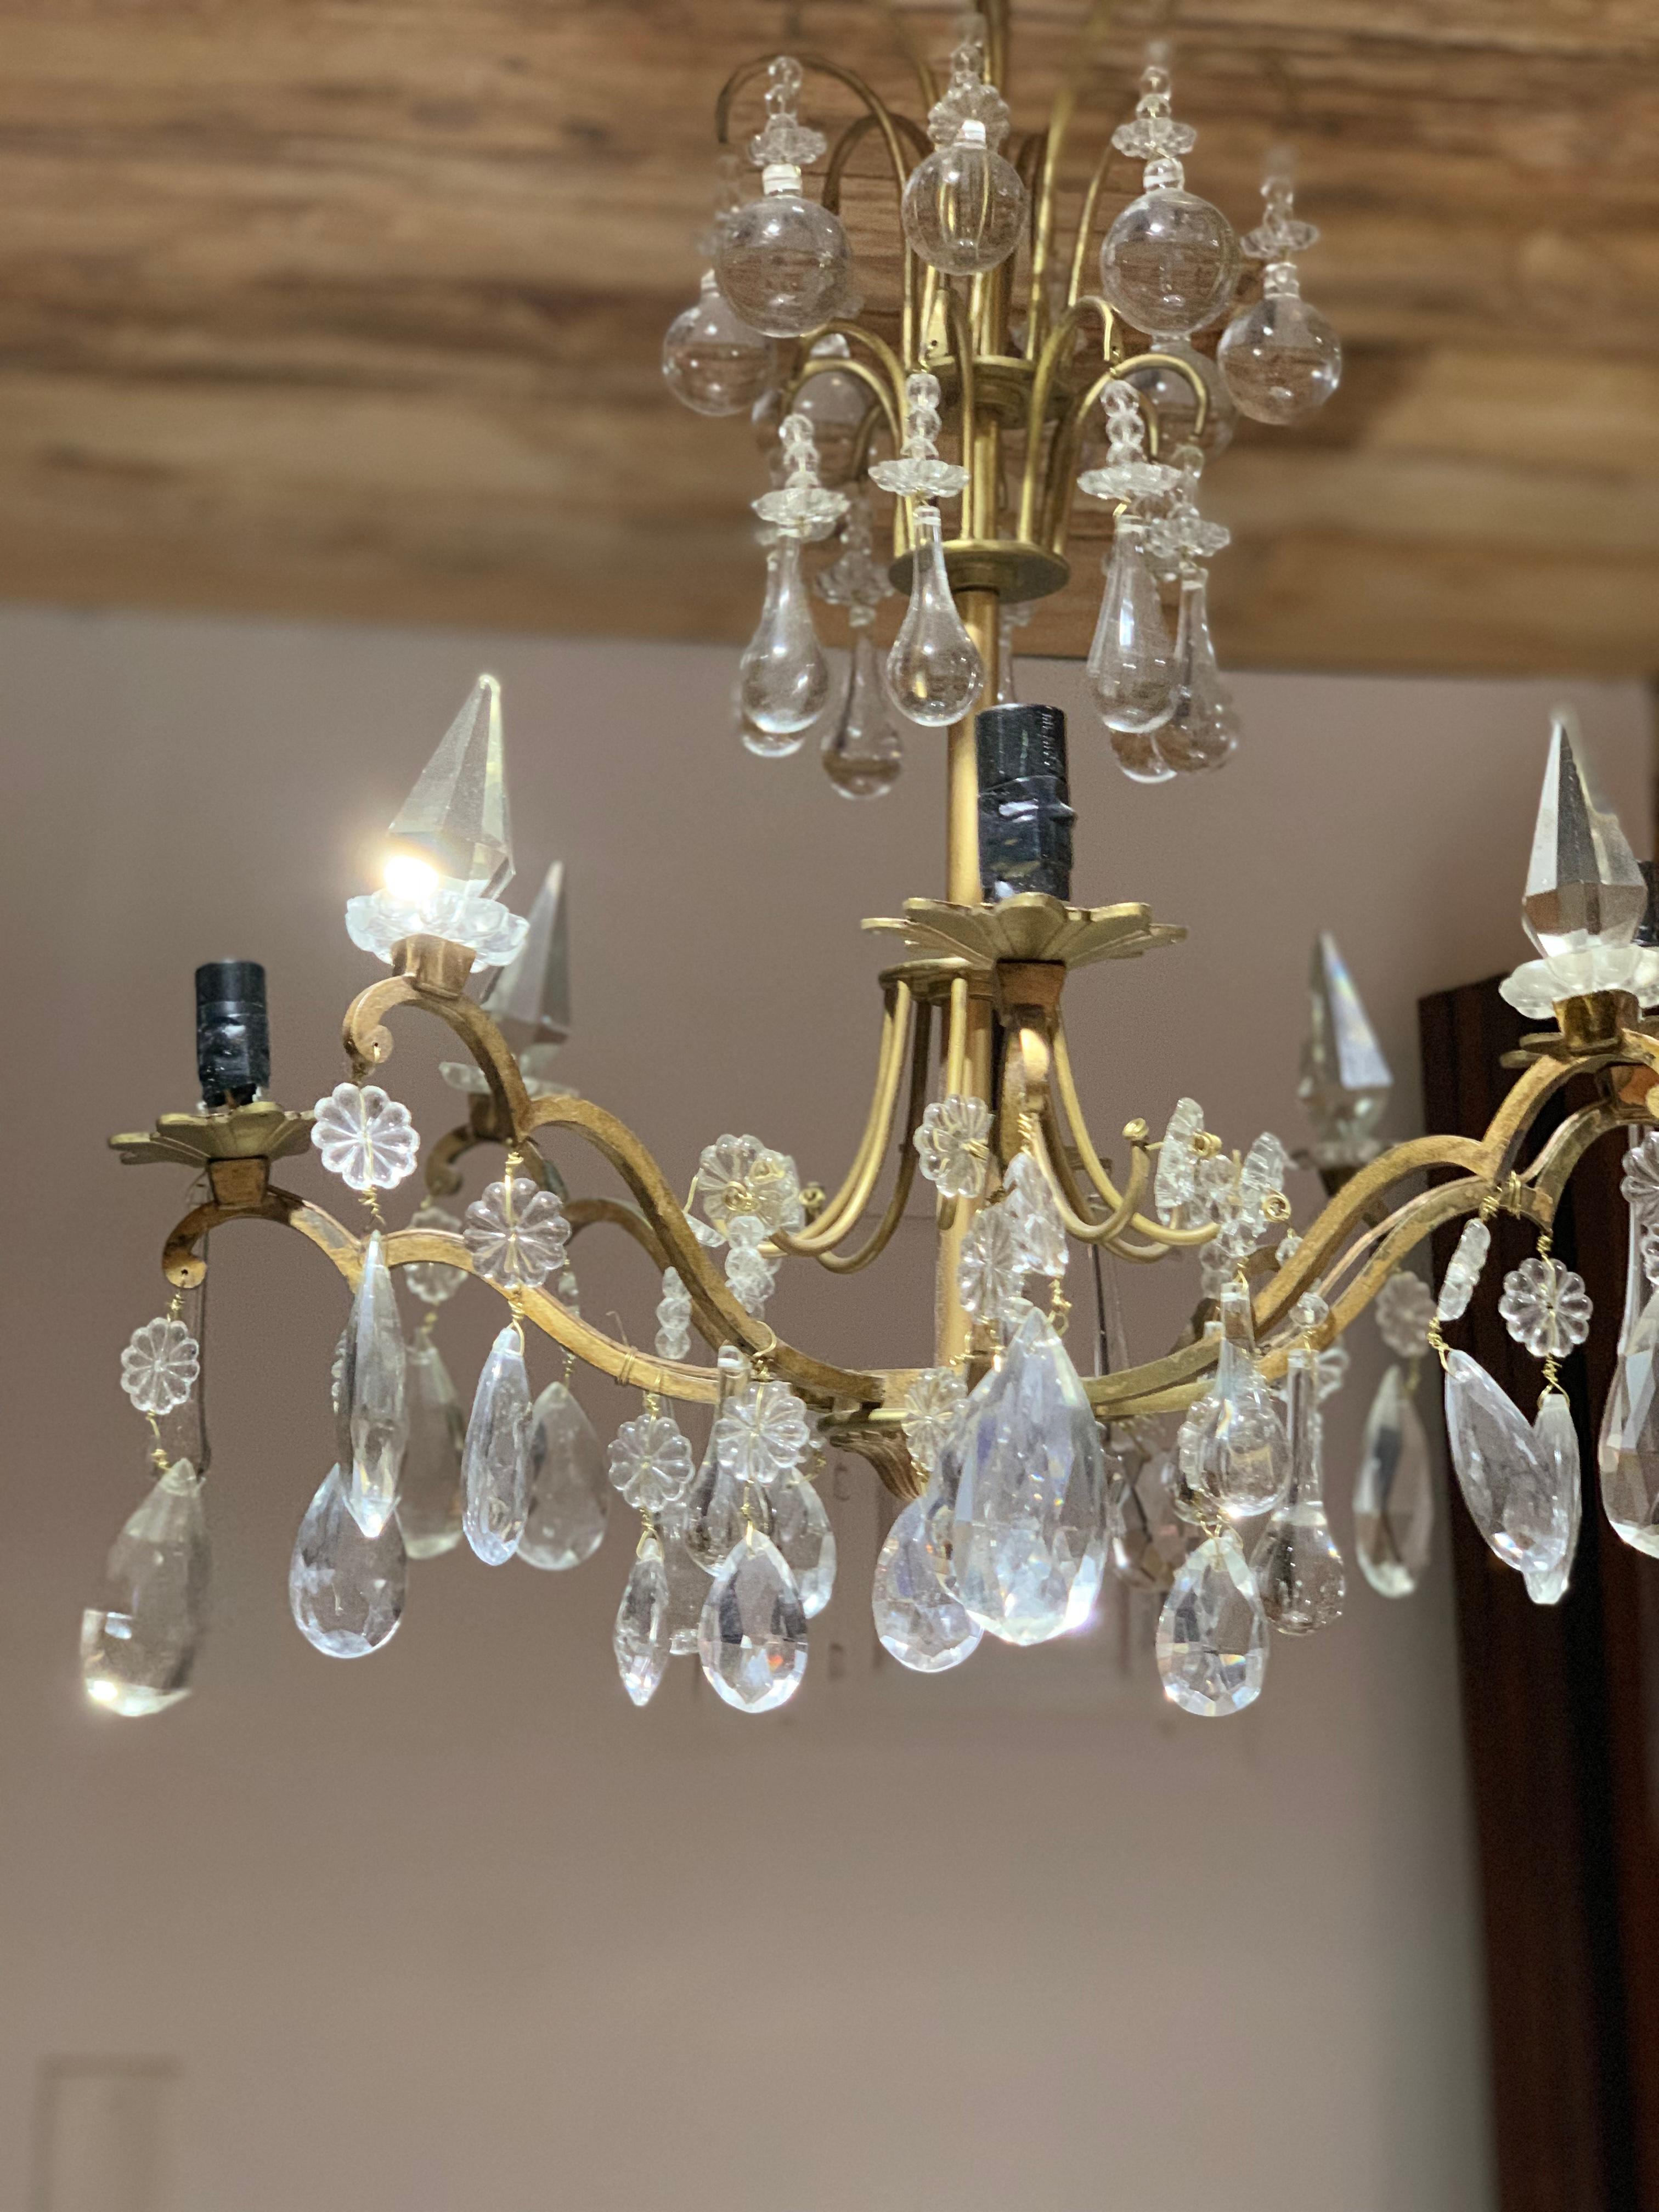 Belle époque, Baccarat manner mixed metal & crystal diminutive chandelier. Adorable vintage piece, with gorgeous heavy crystal and a mix of metals.